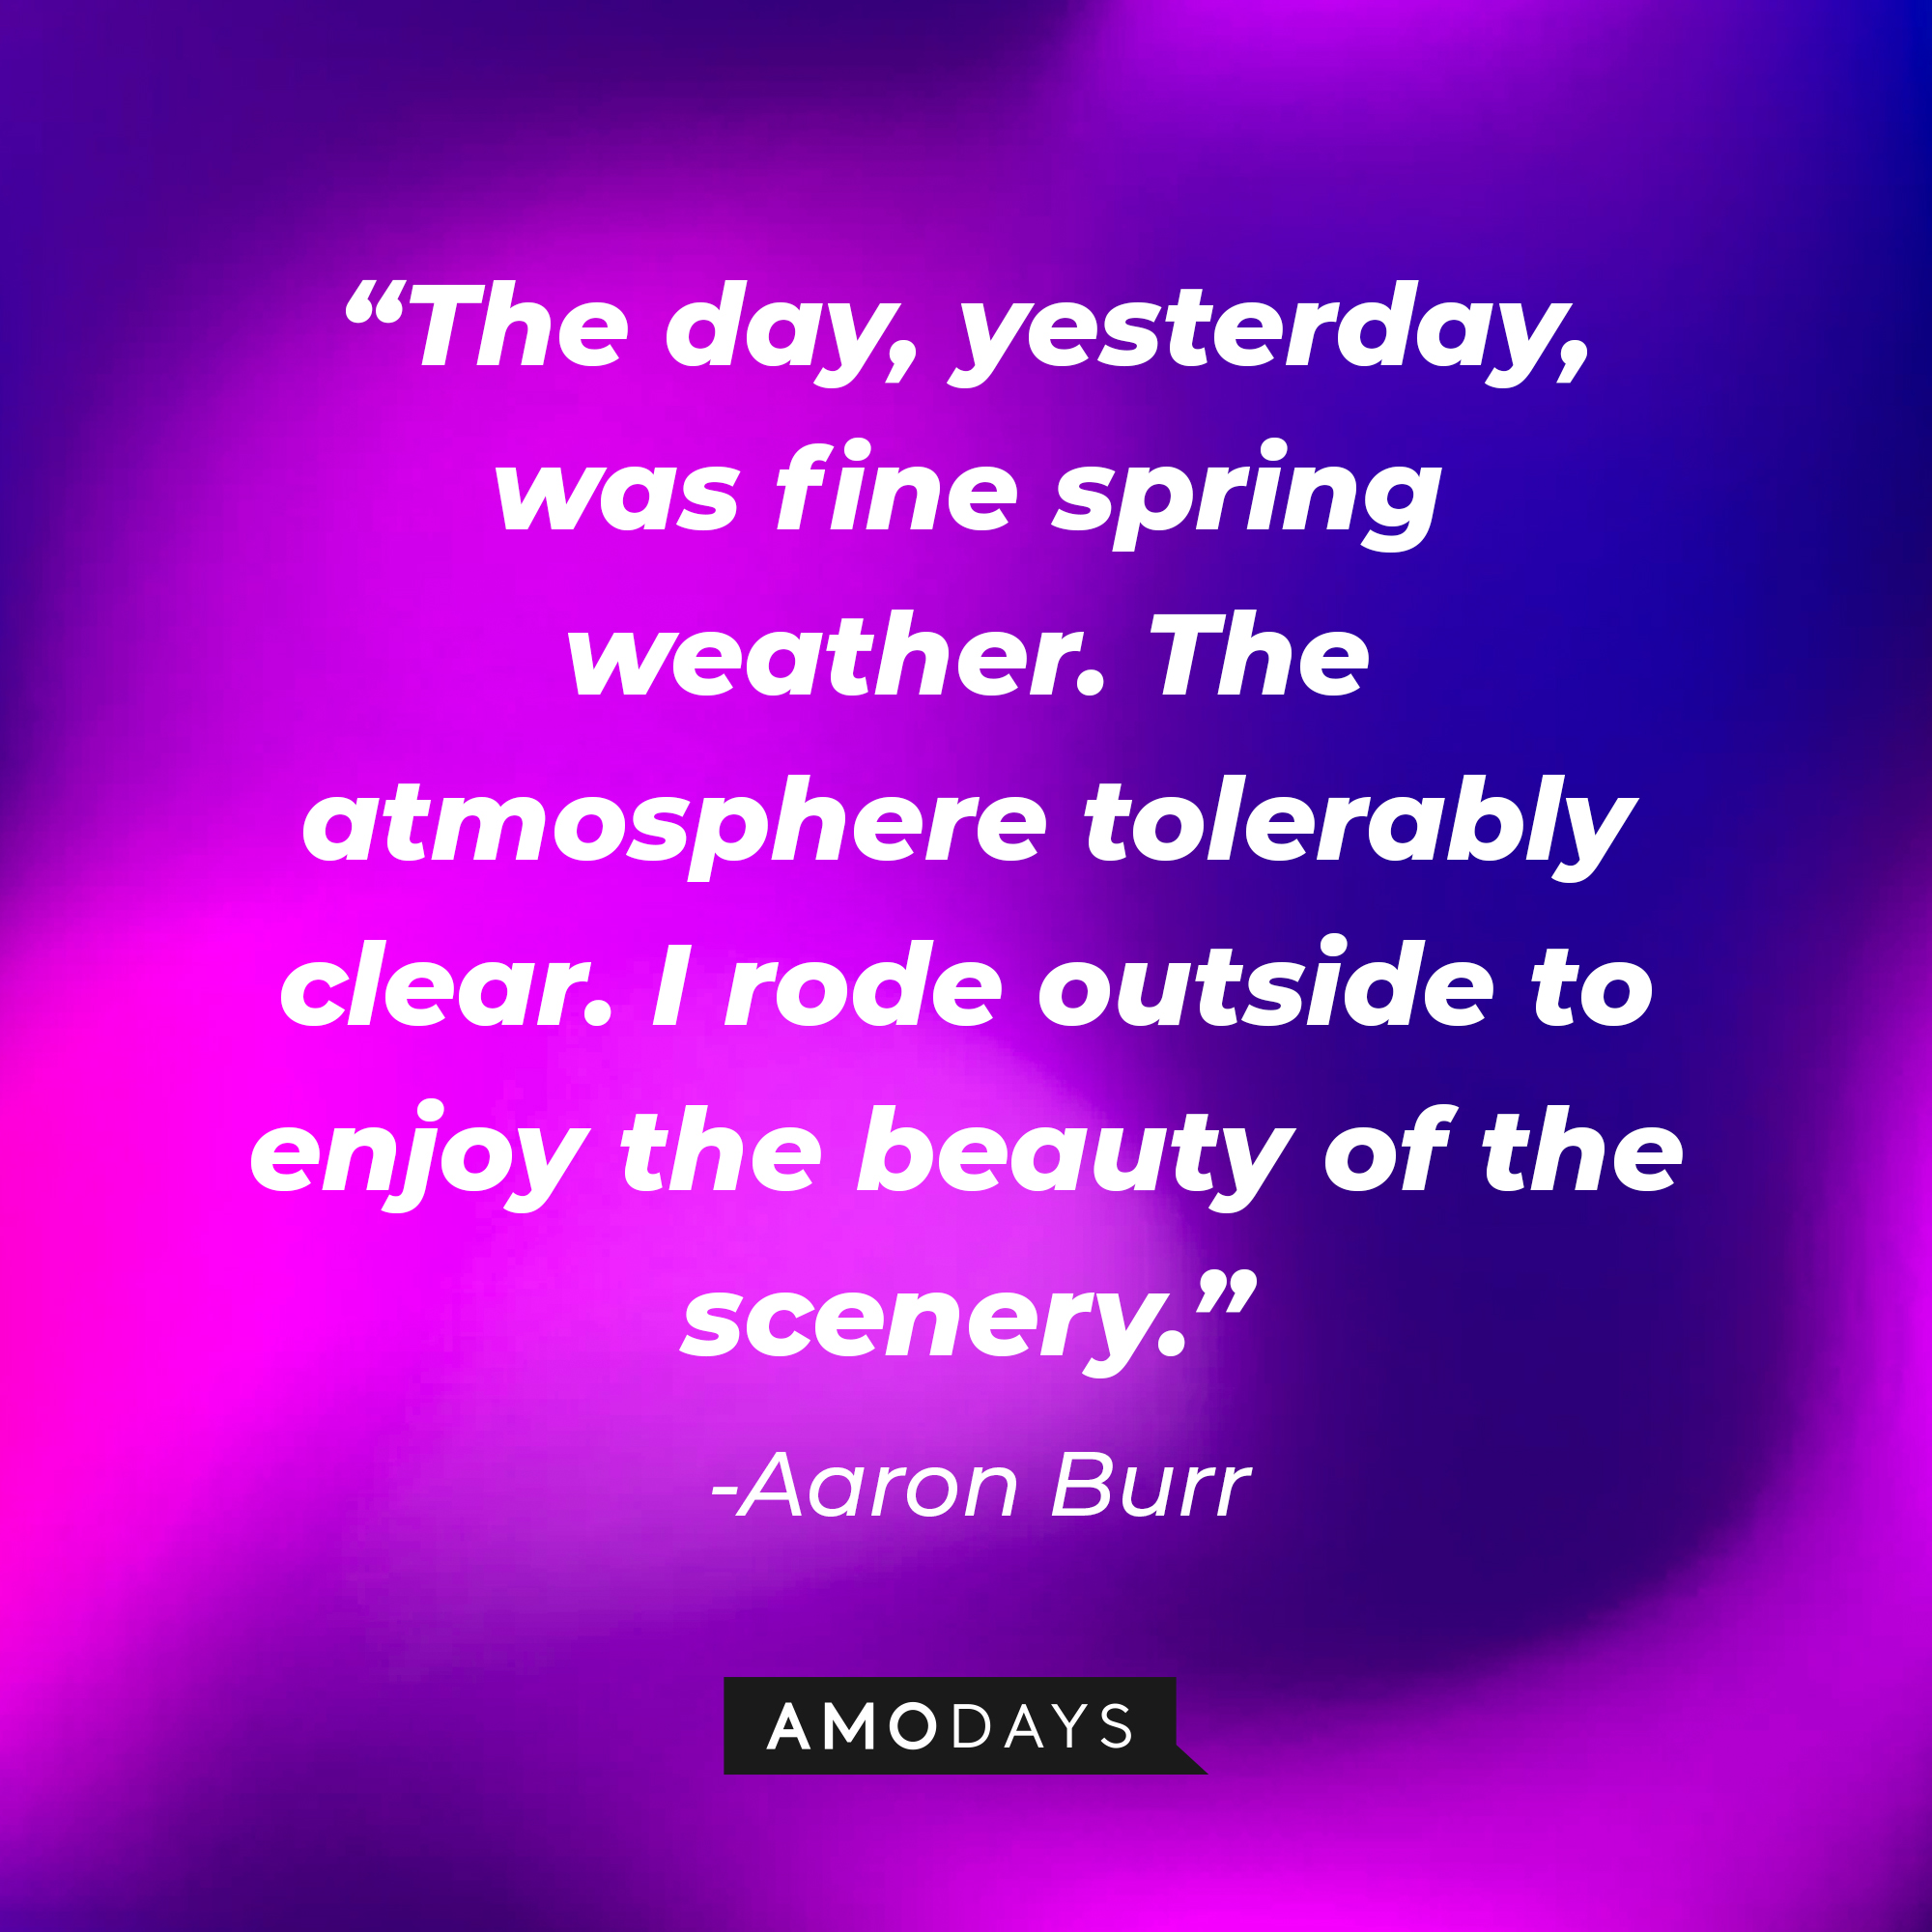 Aaron Burr’s quote: “The day, yesterday, was fine spring weather. The atmosphere tolerably clear. I rode outside to enjoy the beauty of the scenery.” | Source: AmoDays